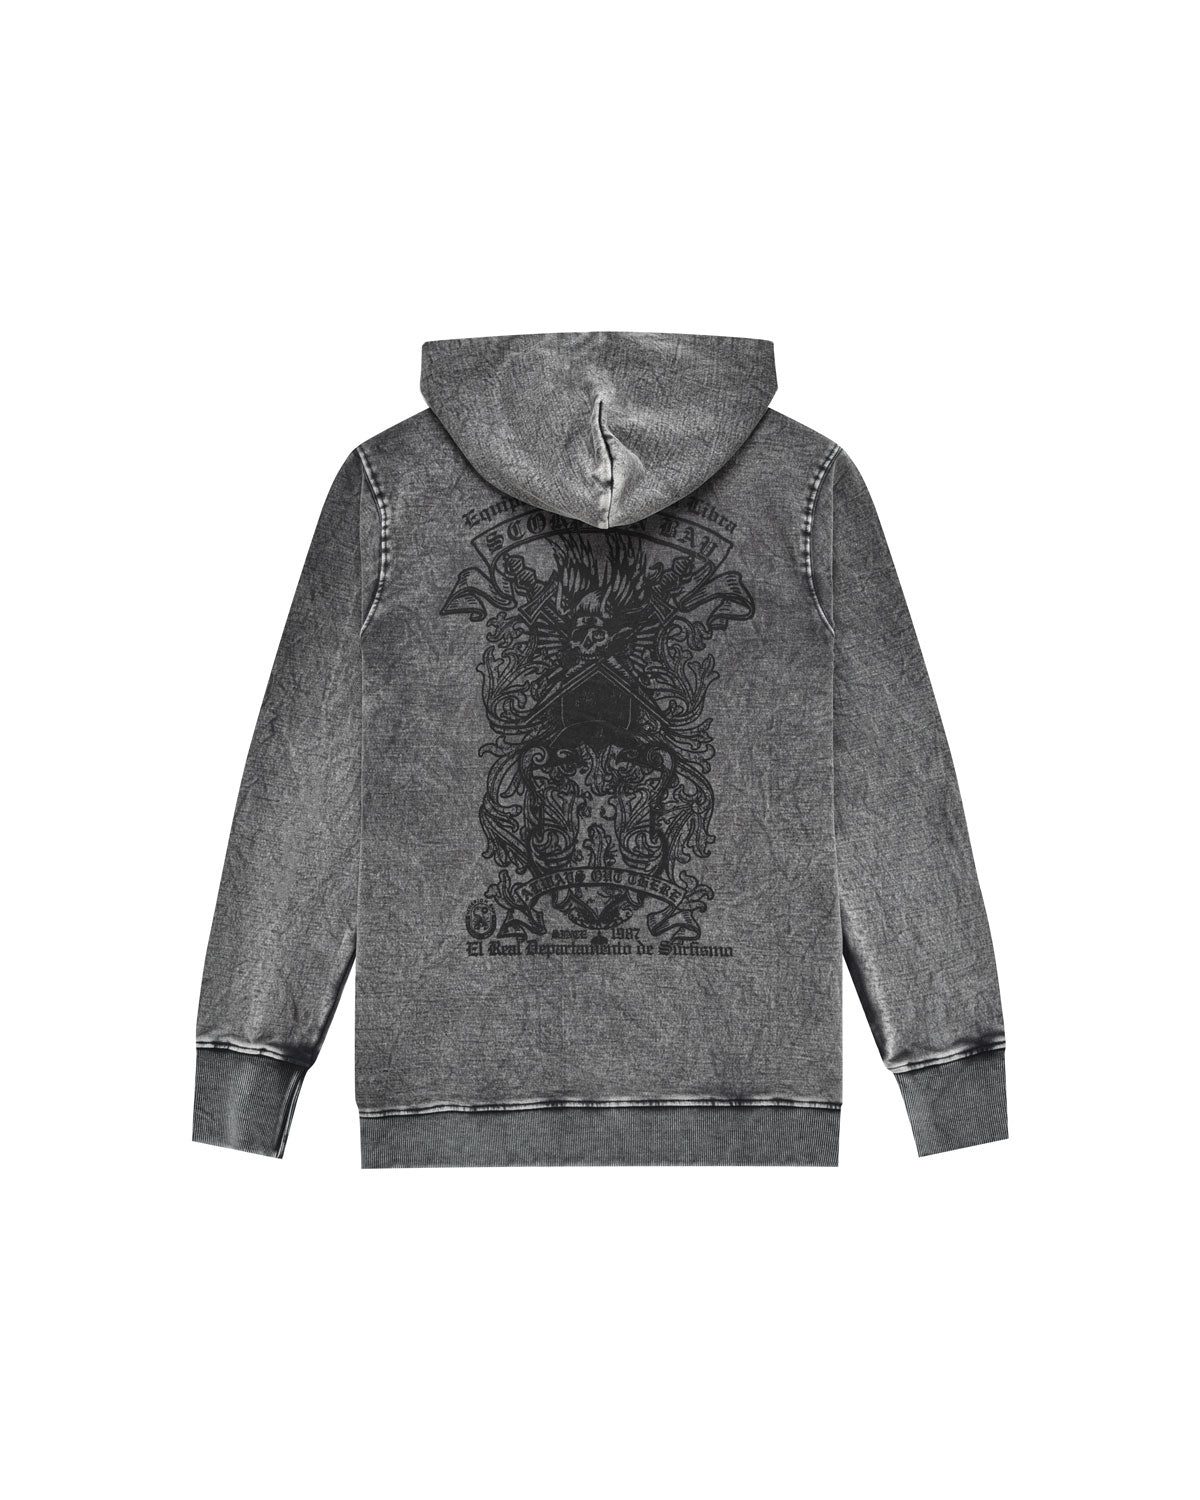 Man | Stonewashed Anthracite Sweatshirt With Hood And “Dept De Surfismo” Print